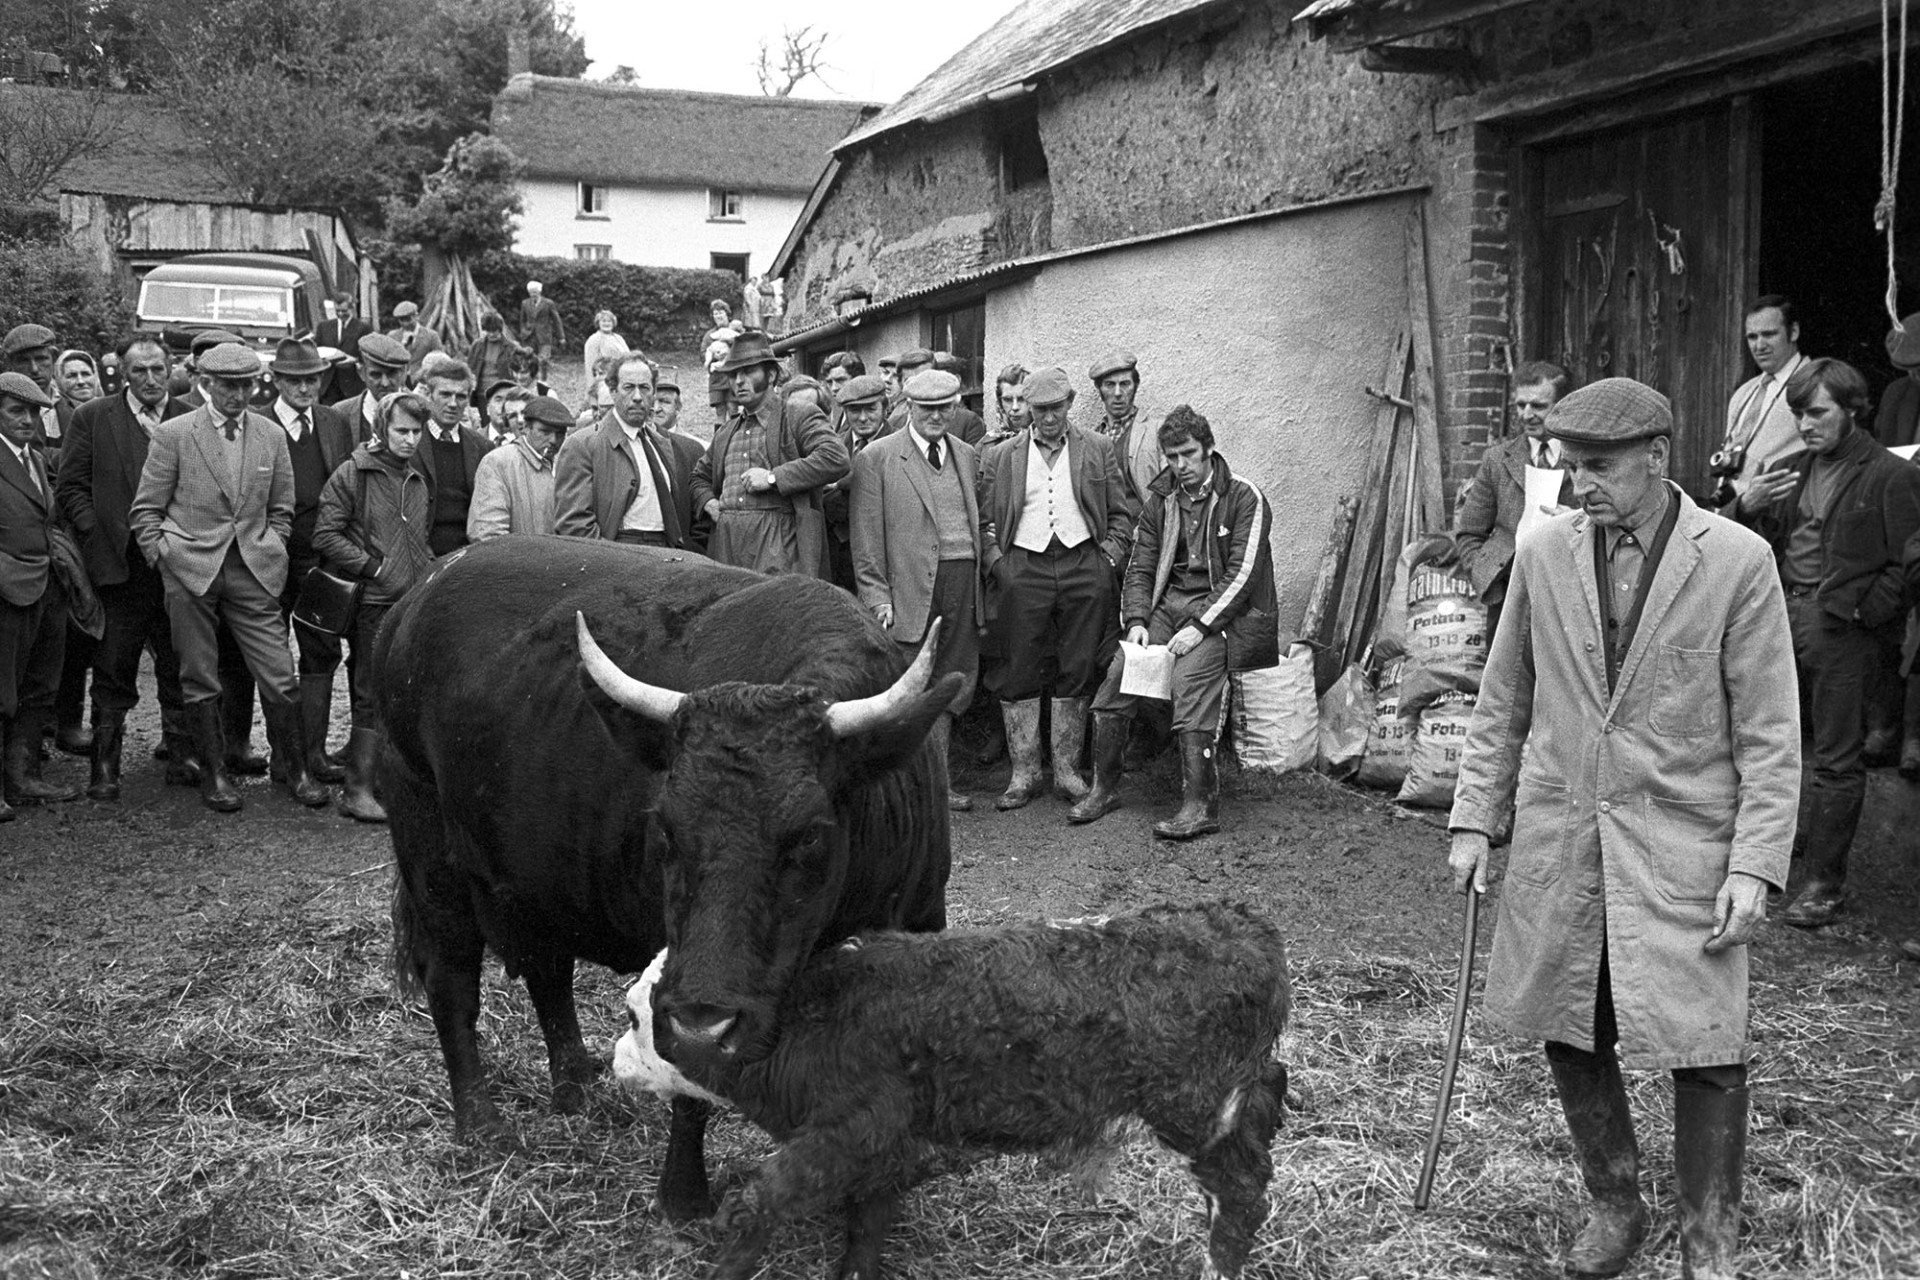 Farmer showing Devon Red cow at farm sale.
[Harry Webber showing a Red Devon cow with horns and white faced calf in the farmyard at a farm sale at White Cleave Farm in Burrington. People are gathered around looking at the cow and calf. A barn and  thatched farmhouse can be seen in the background.]